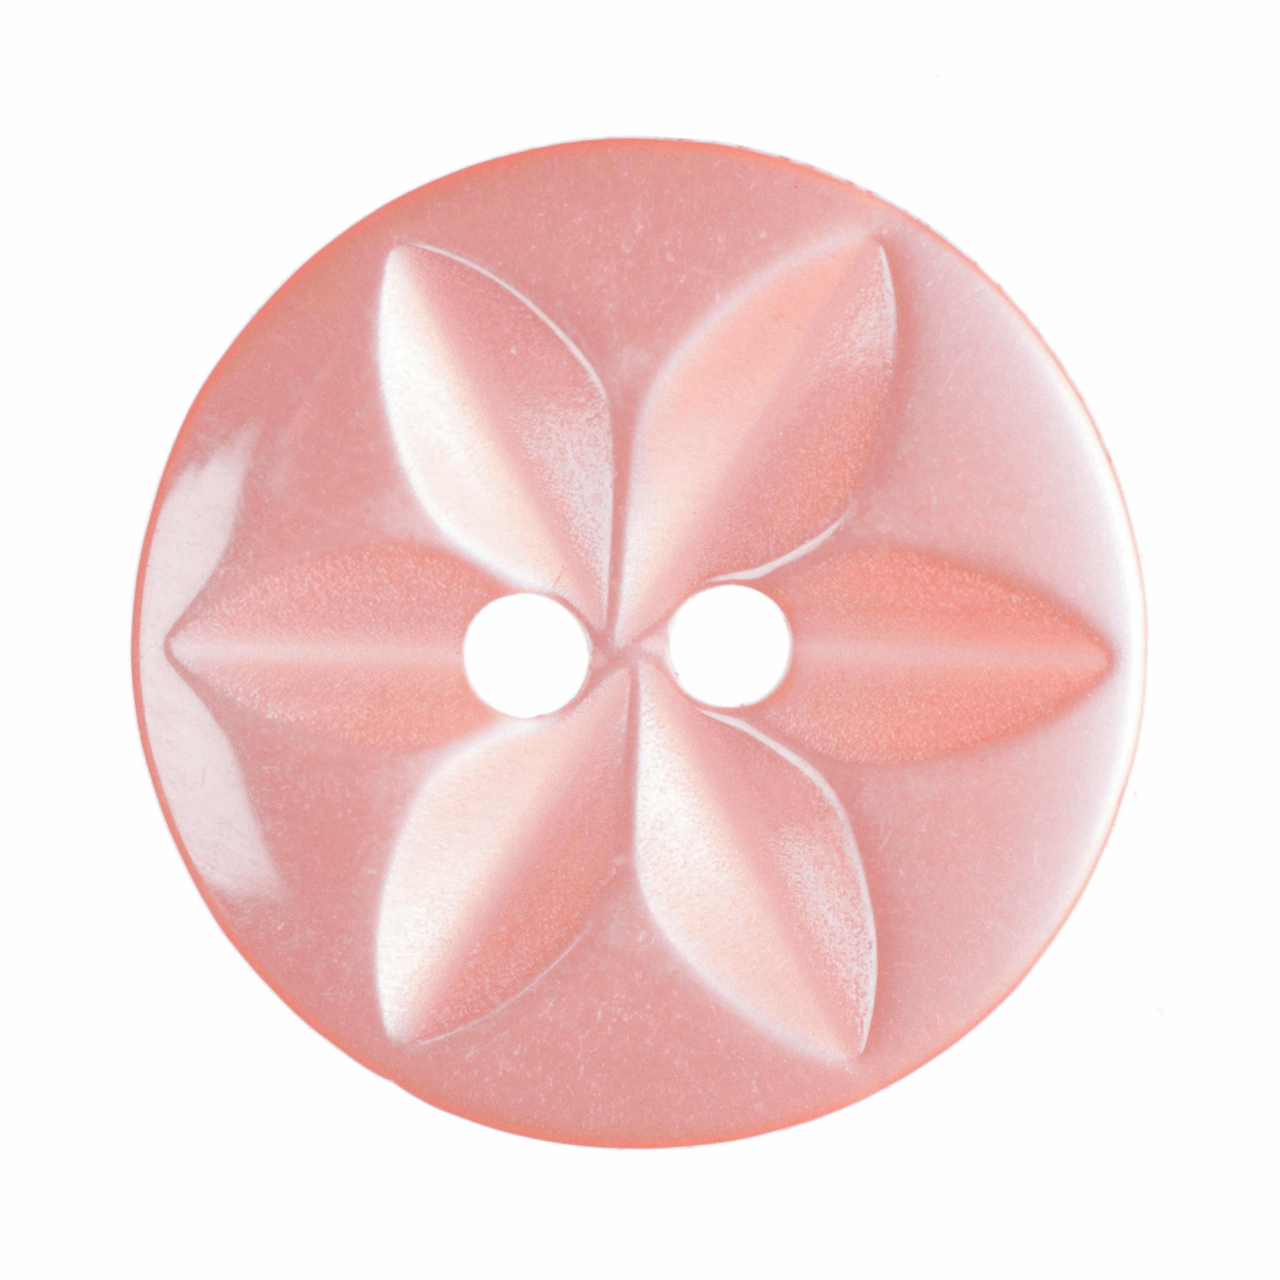 Salmon Pink Star Button, 16mm (5/8in) Diameter (Sold Individually)